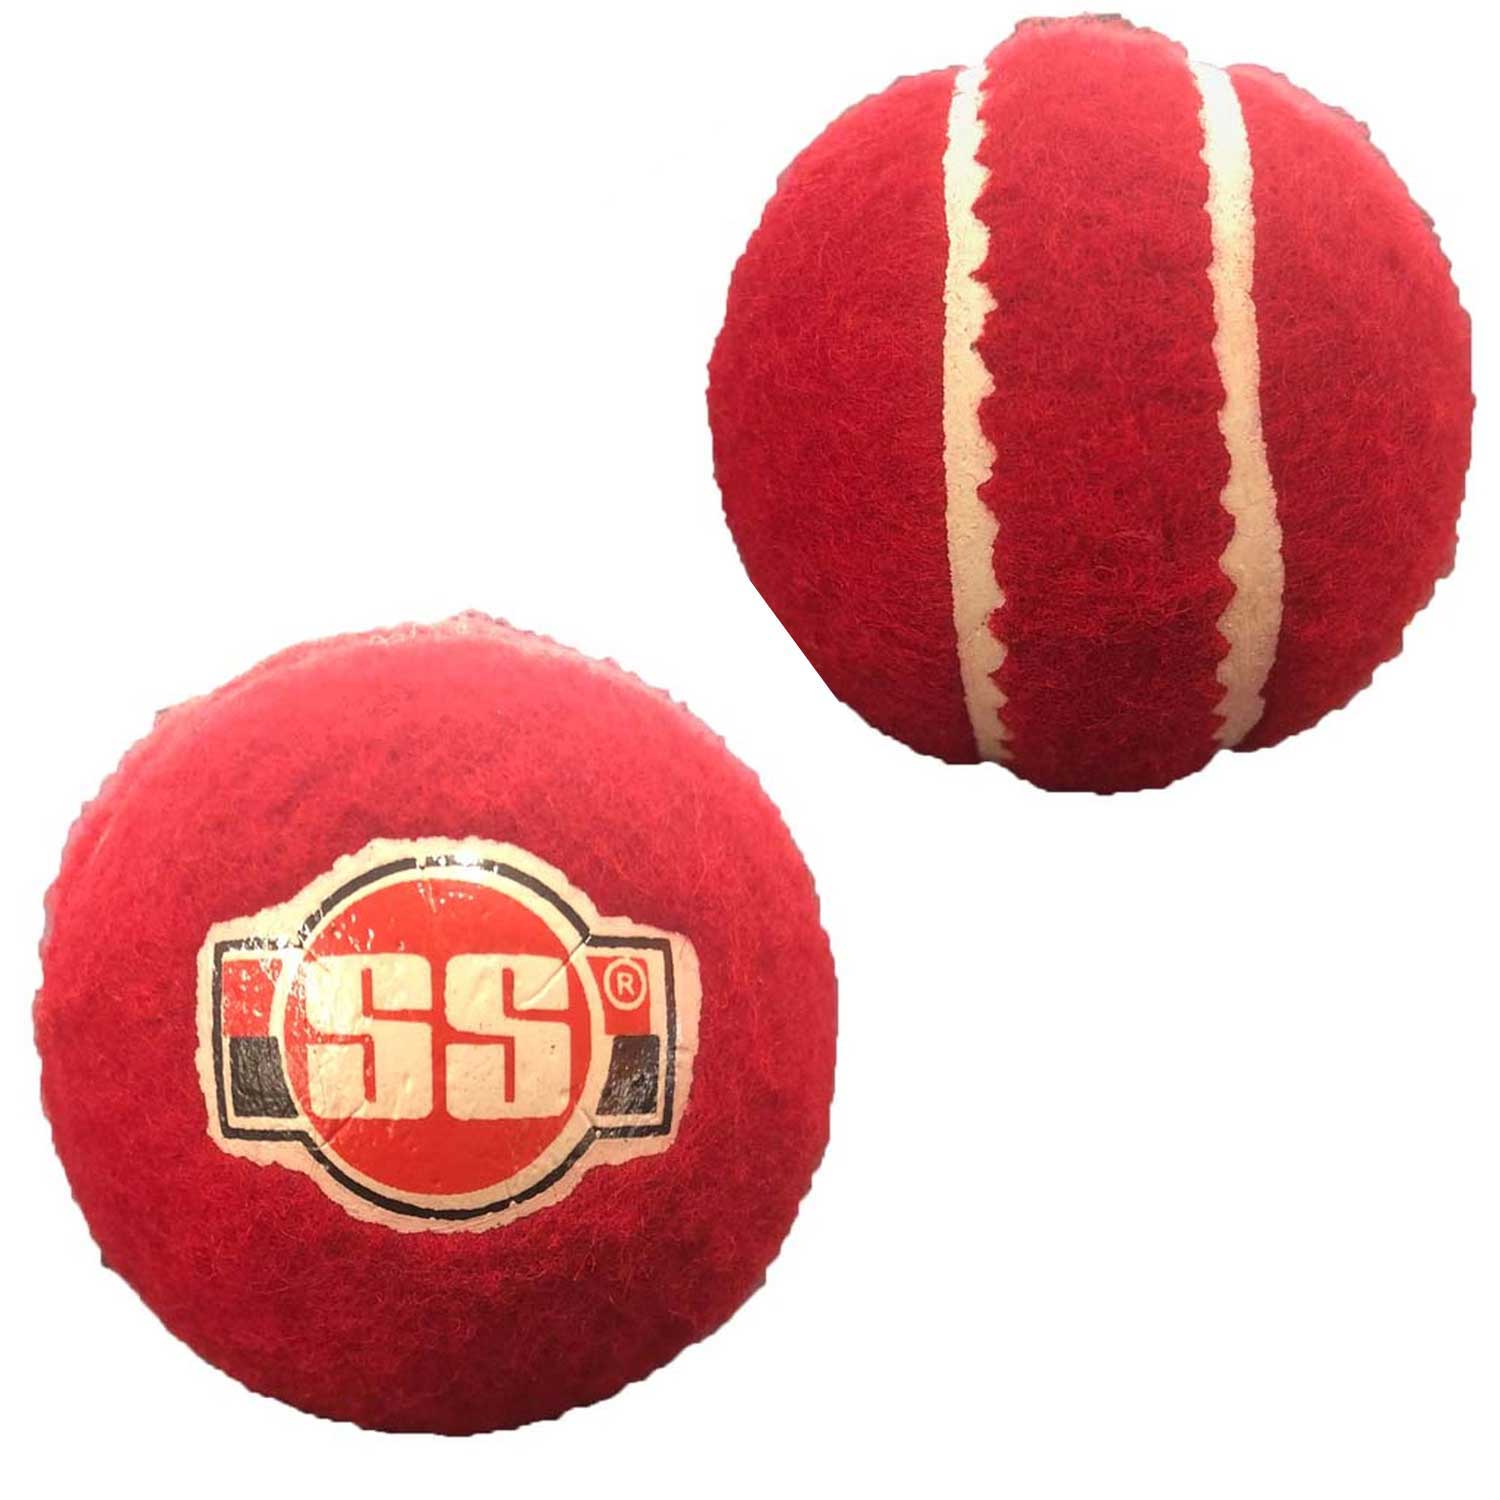 SS Tennis Ball with Seam